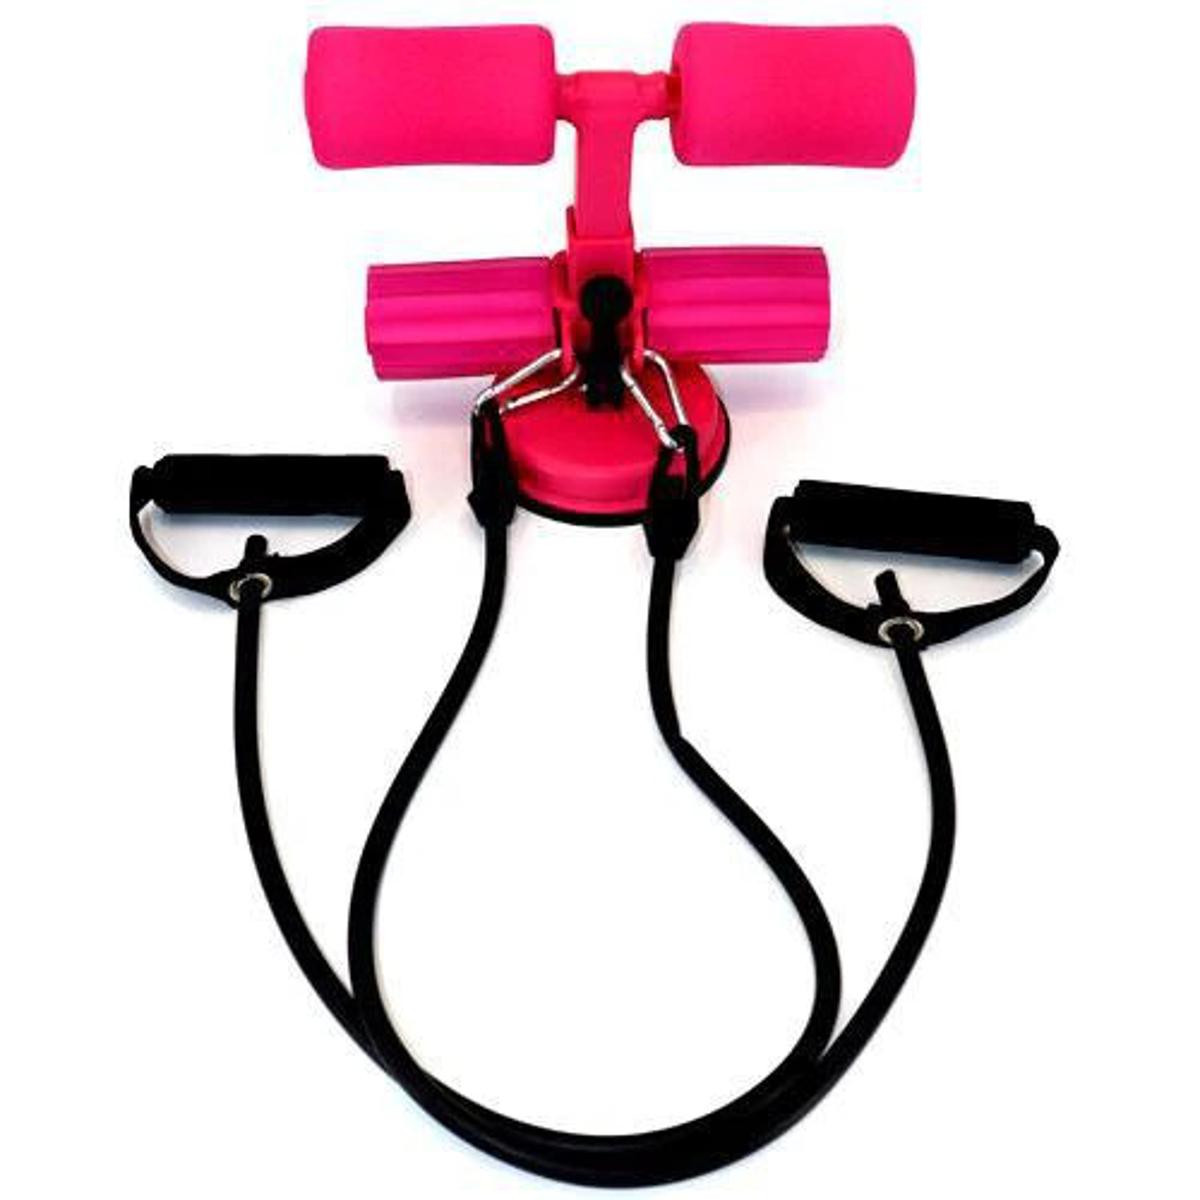 Self Suction Sit Up Bars Stand Abdominal Core Fitness Equipment with Resistance Band